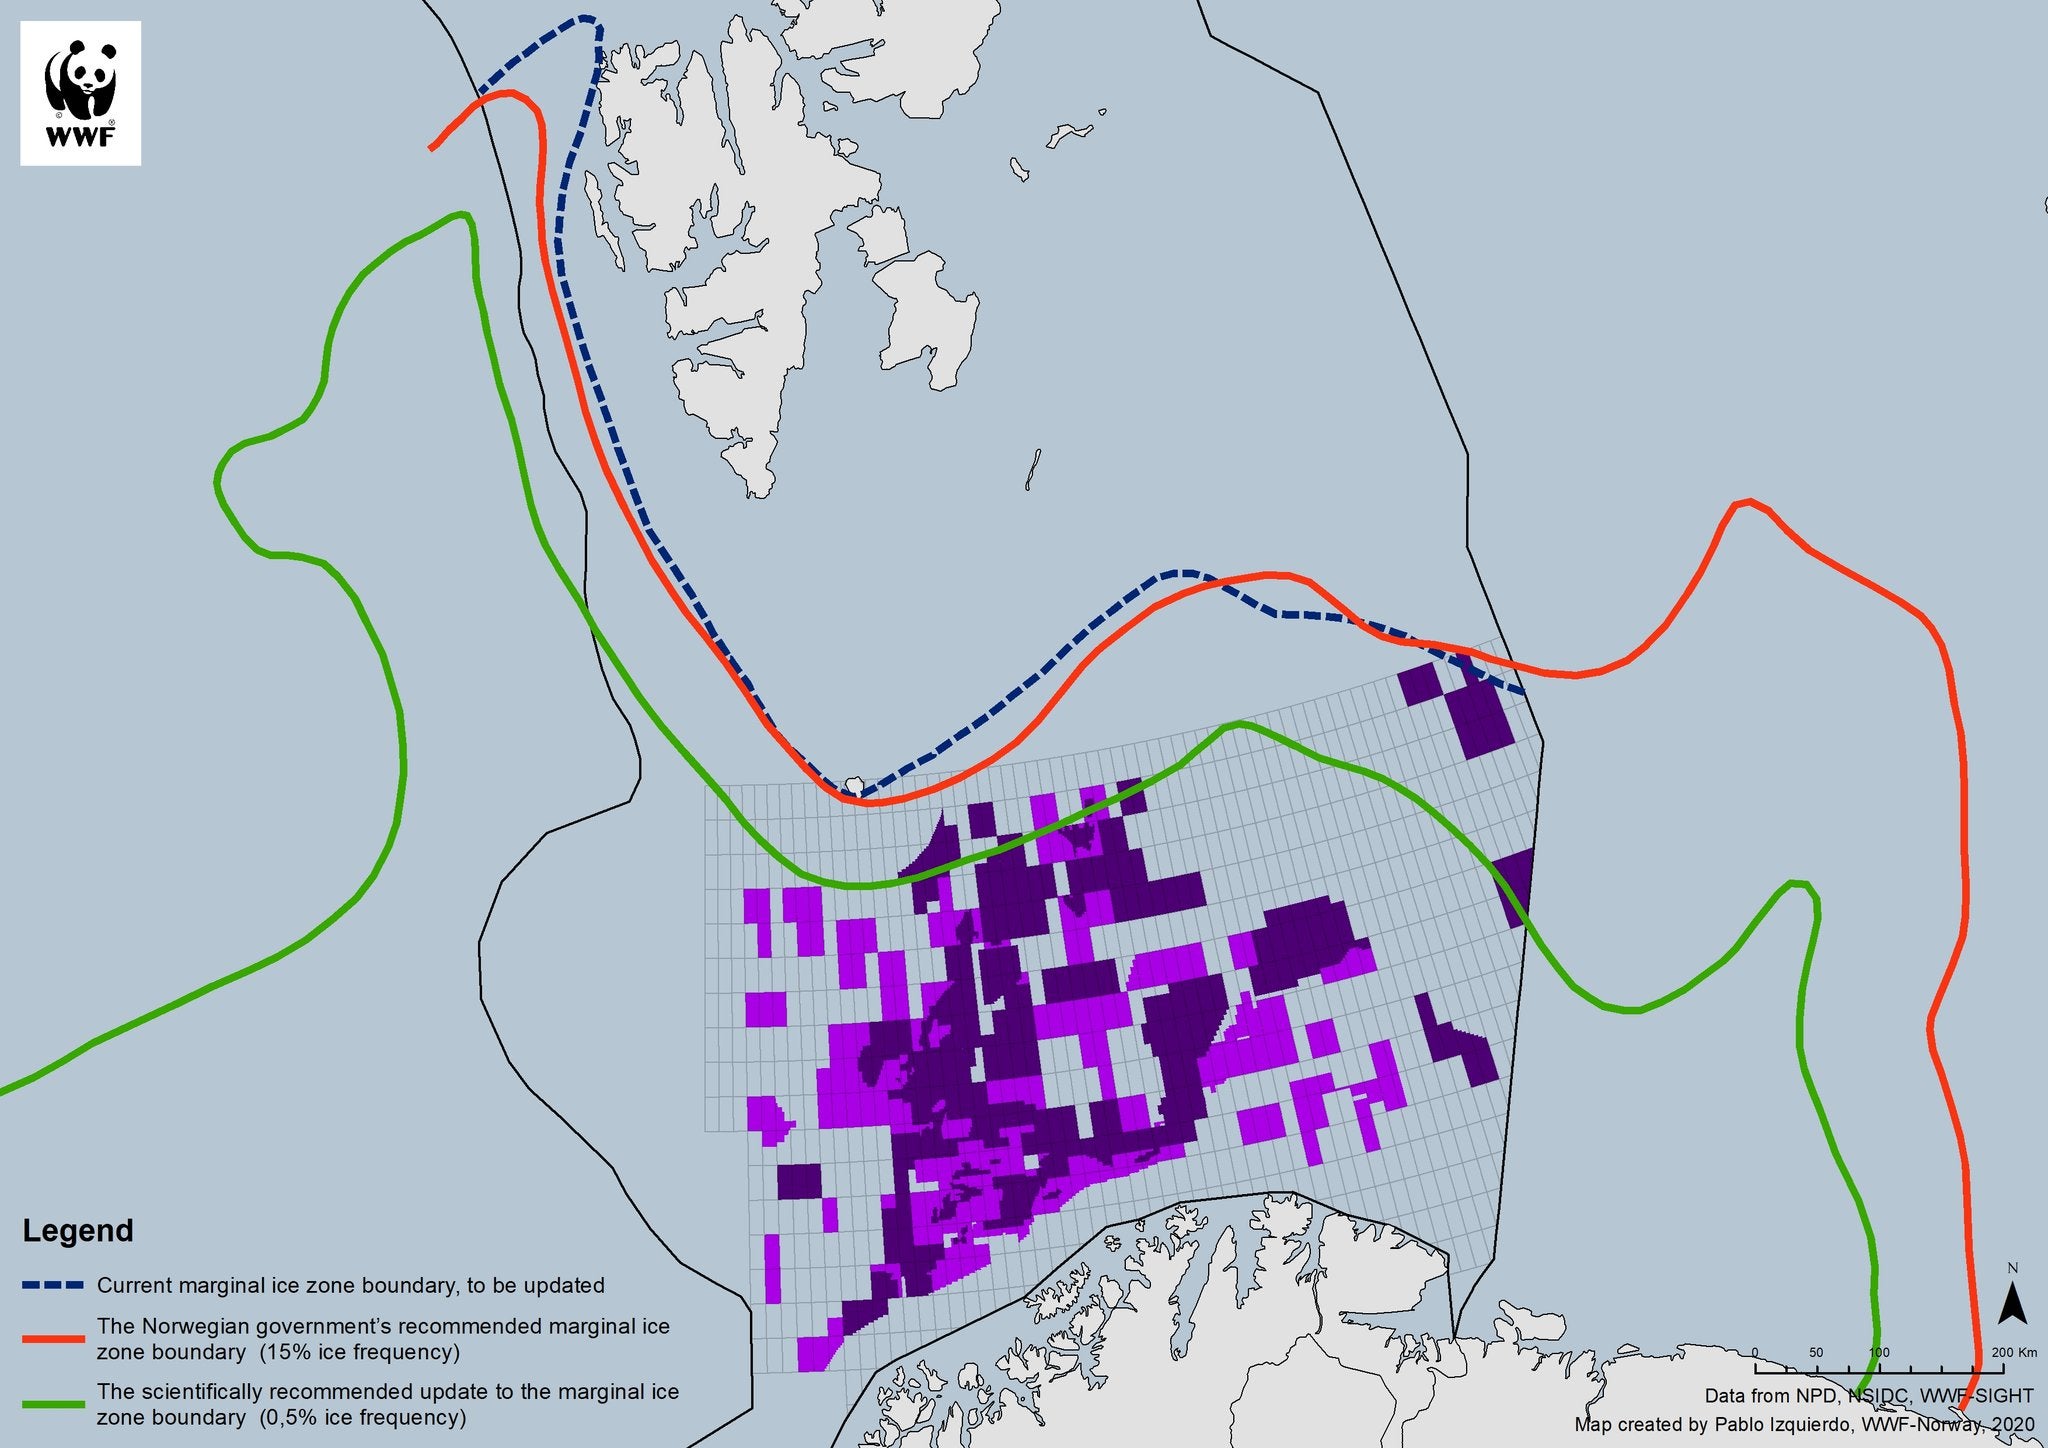 Graph shows current ice zone boundary (blue), the government’s proposal (blue), and recommendation of scientists (green). Purple blocks represent areas for which oil licenses have been granted